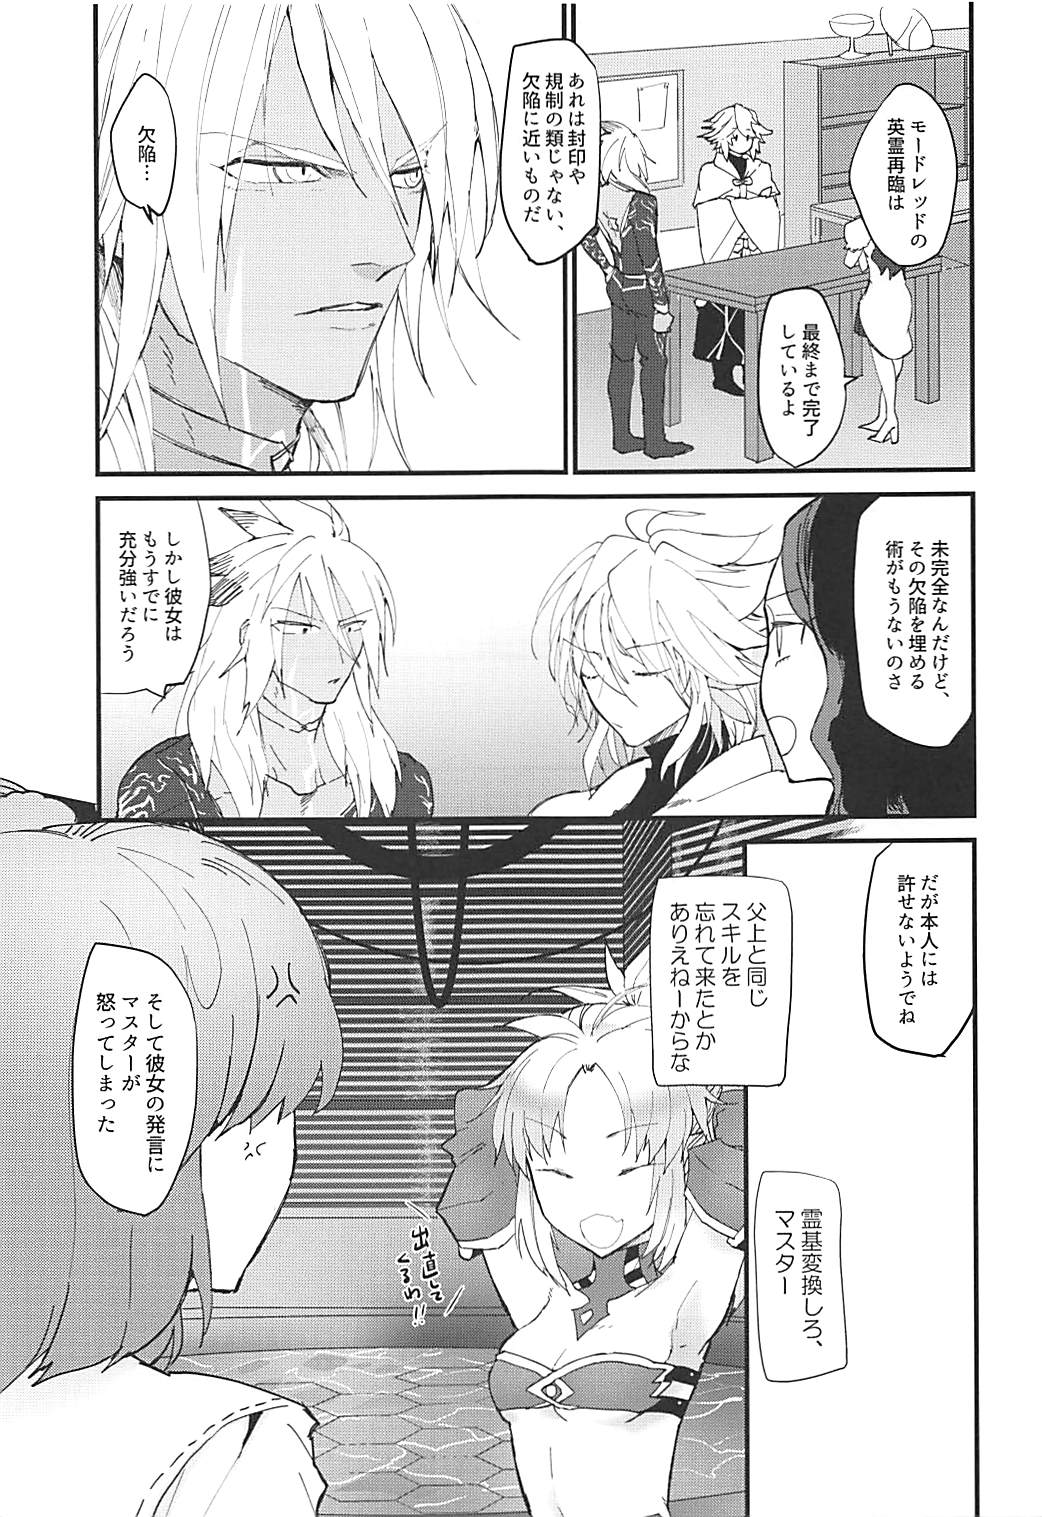 [Dokunuma (Marble)] THE WARRIORS' REST (Fate/Grand Order) page 3 full